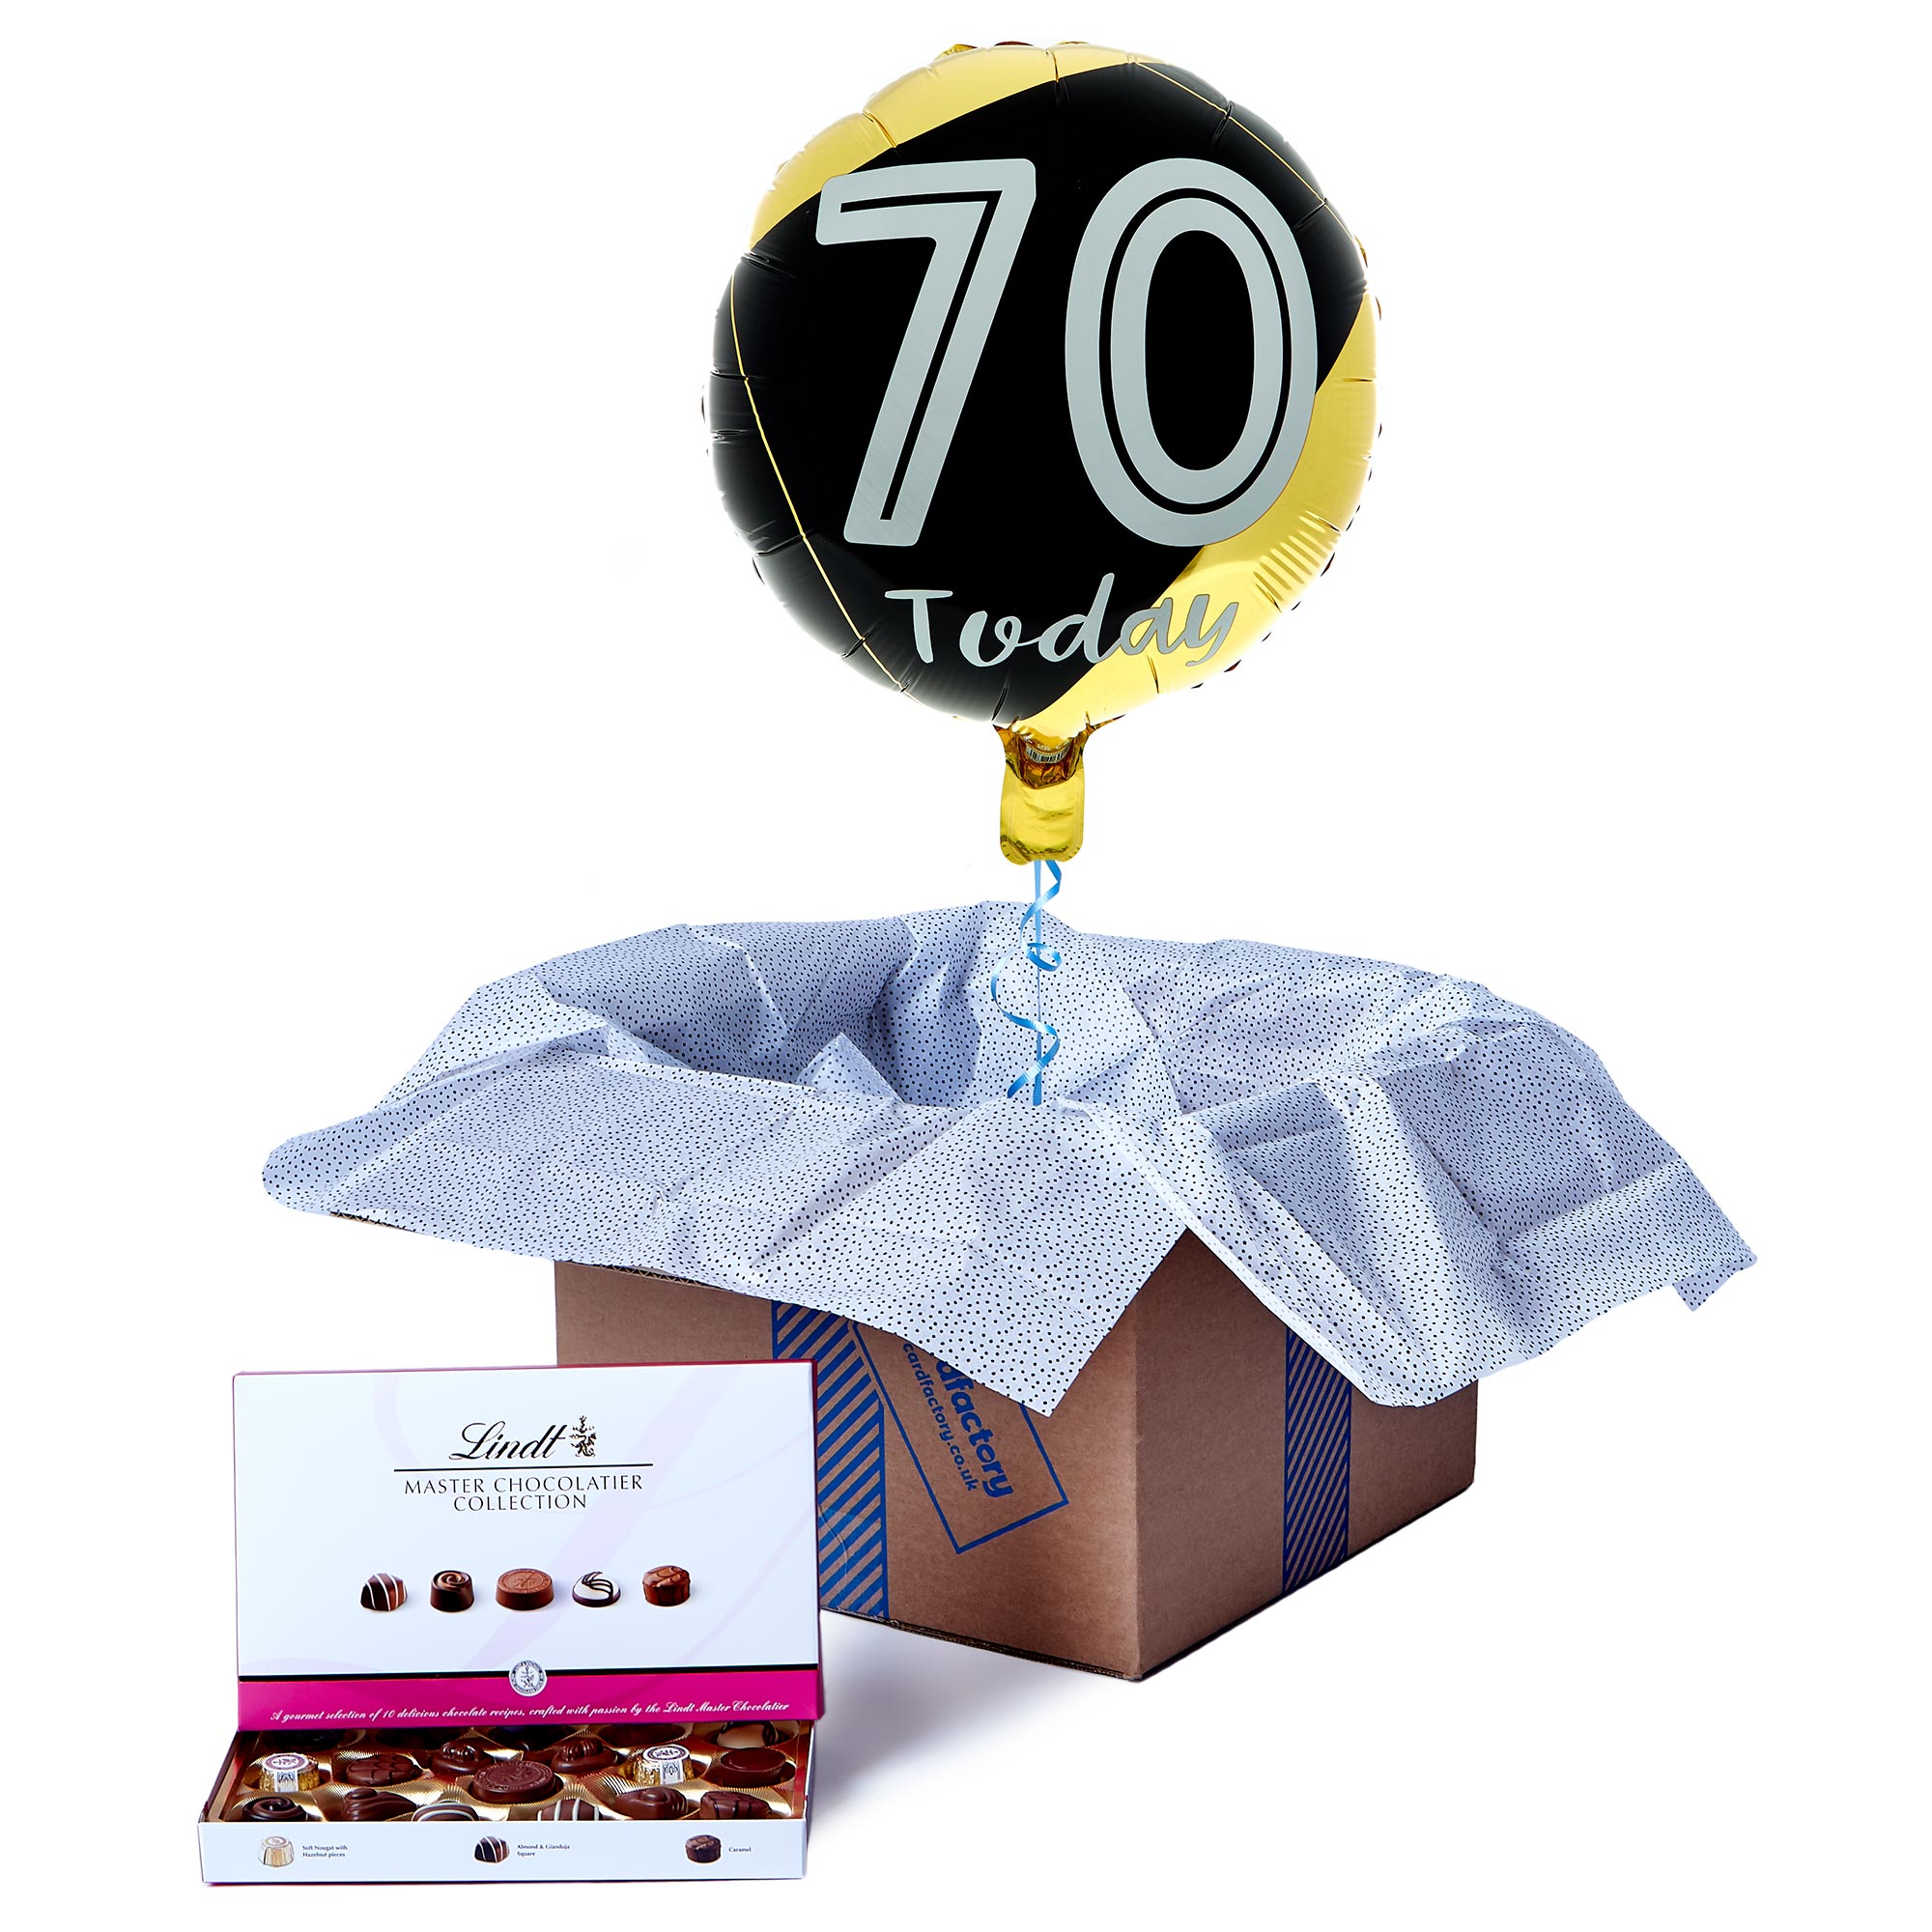 70 Today Birthday Balloon & Lindt Chocolate Box - FREE GIFT CARD!